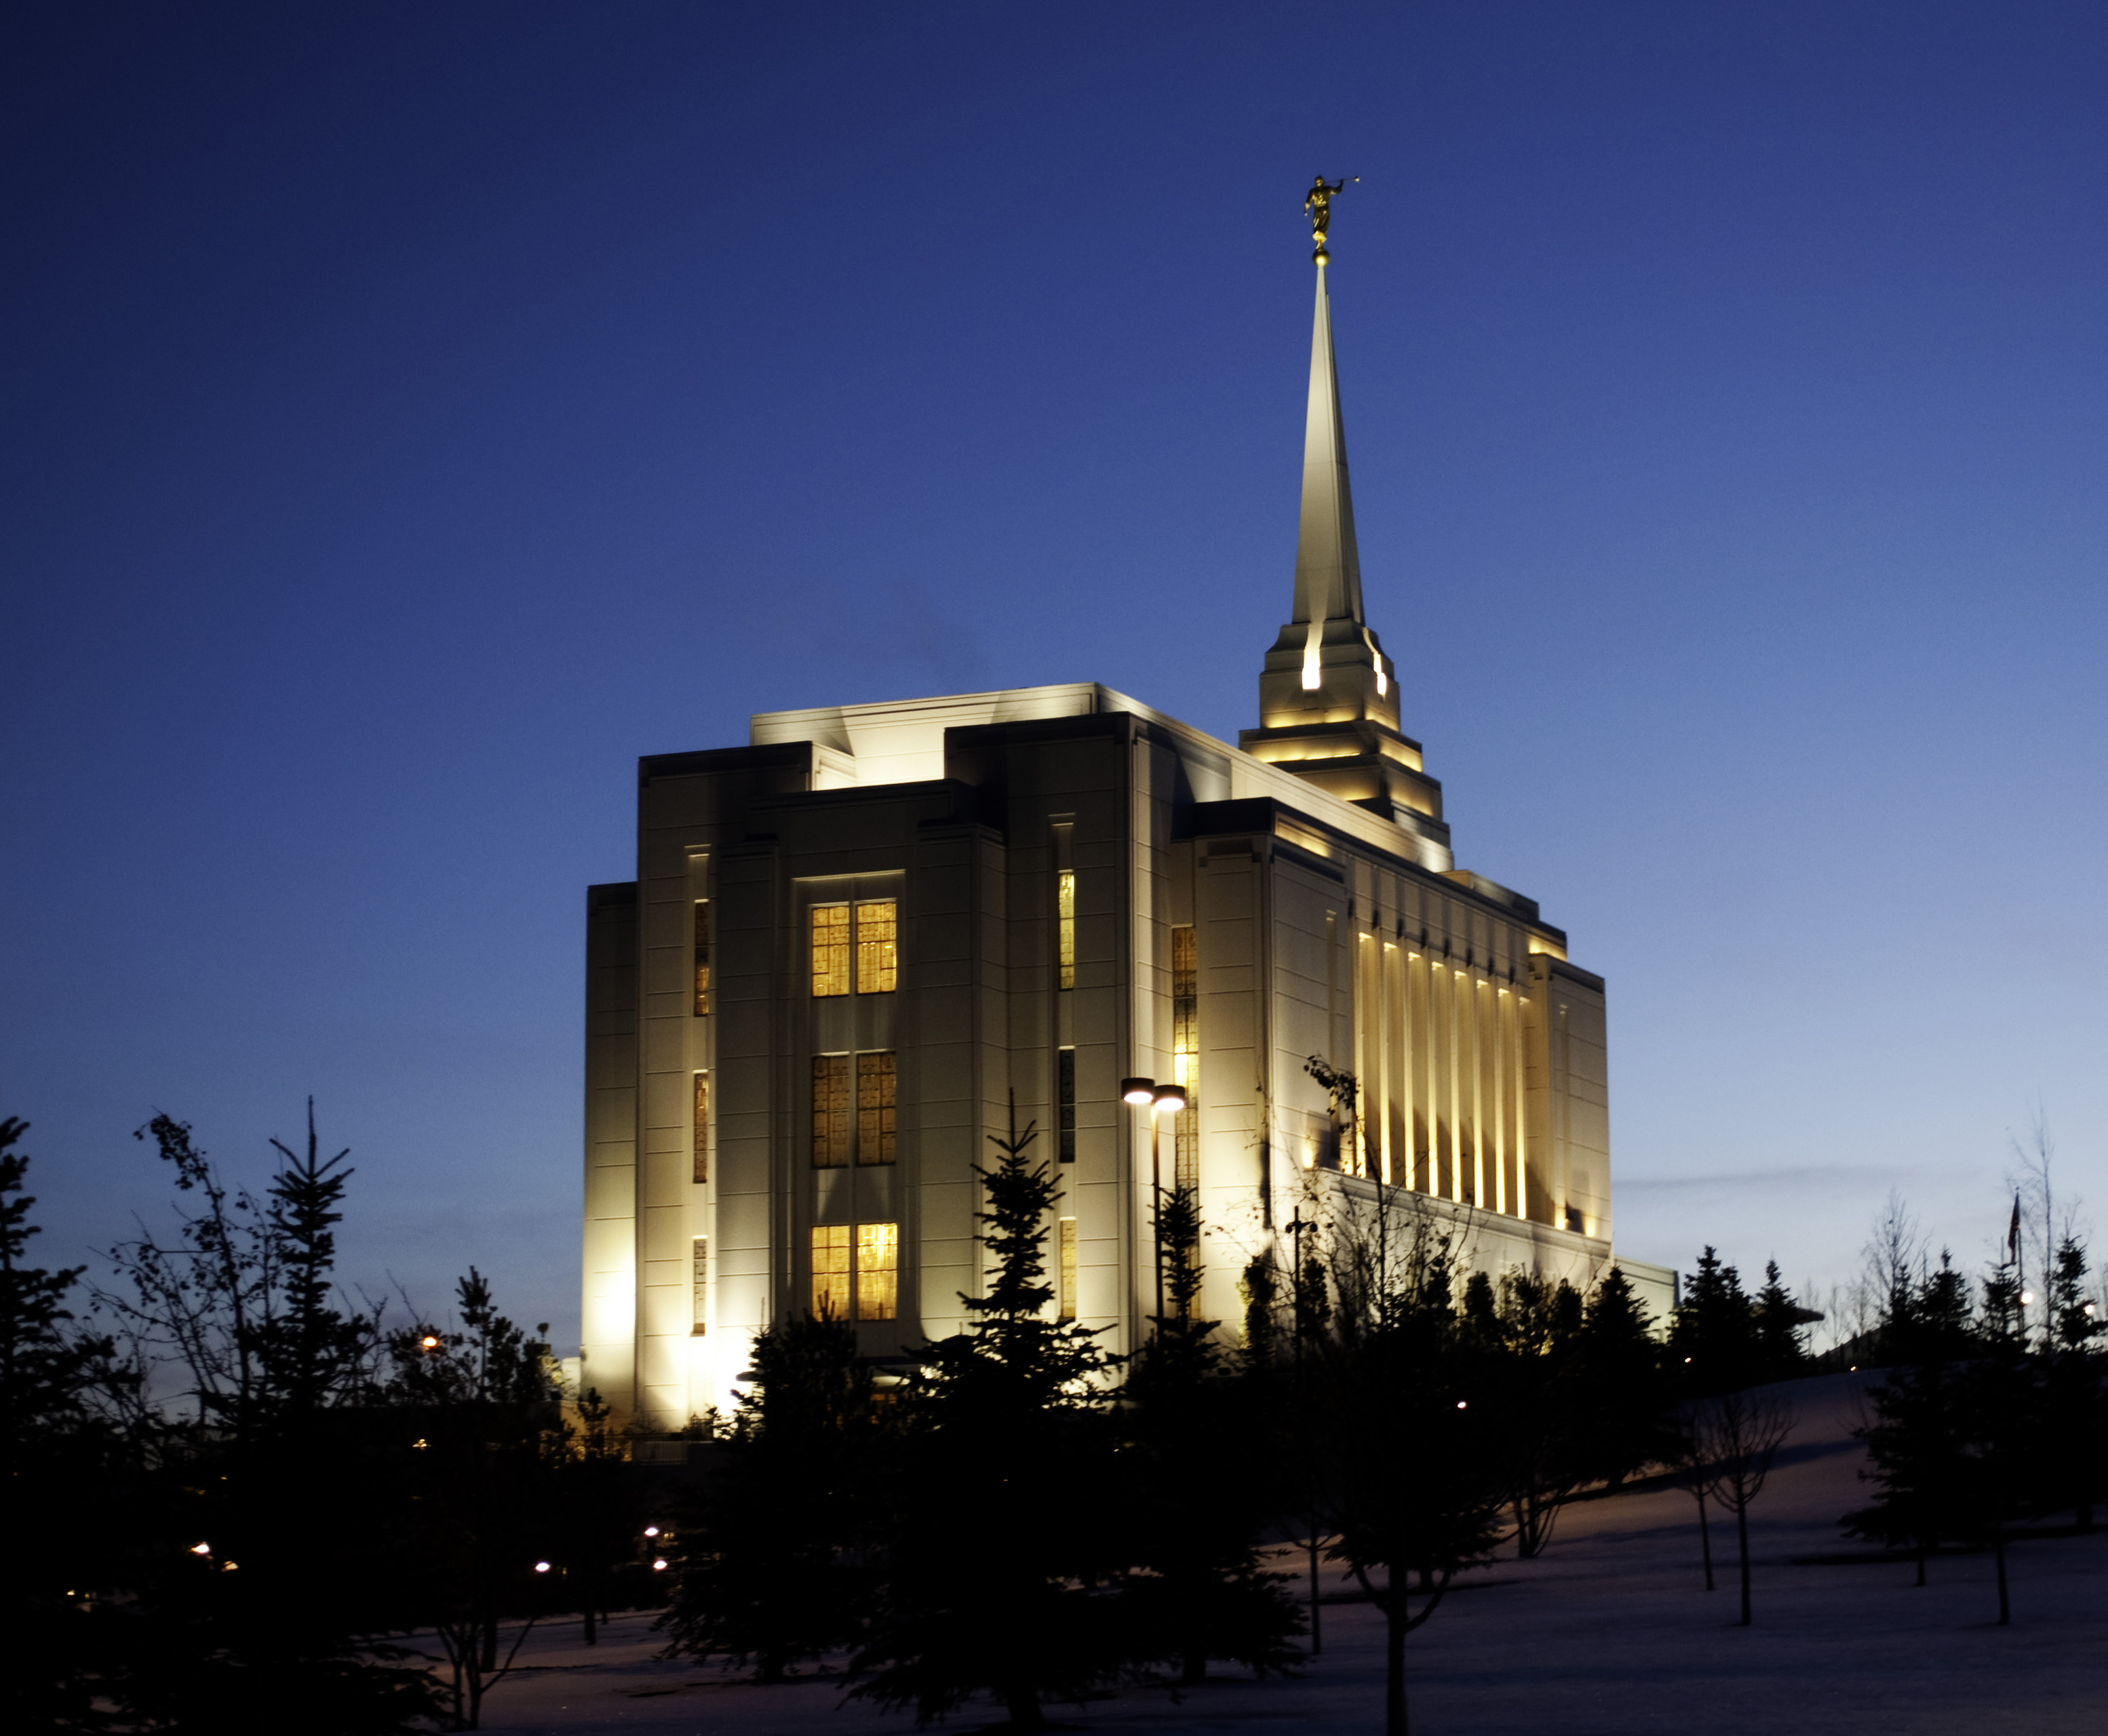 The back of the Rexburg Idaho Temple lit up at night, with a view of the trees on the temple grounds.